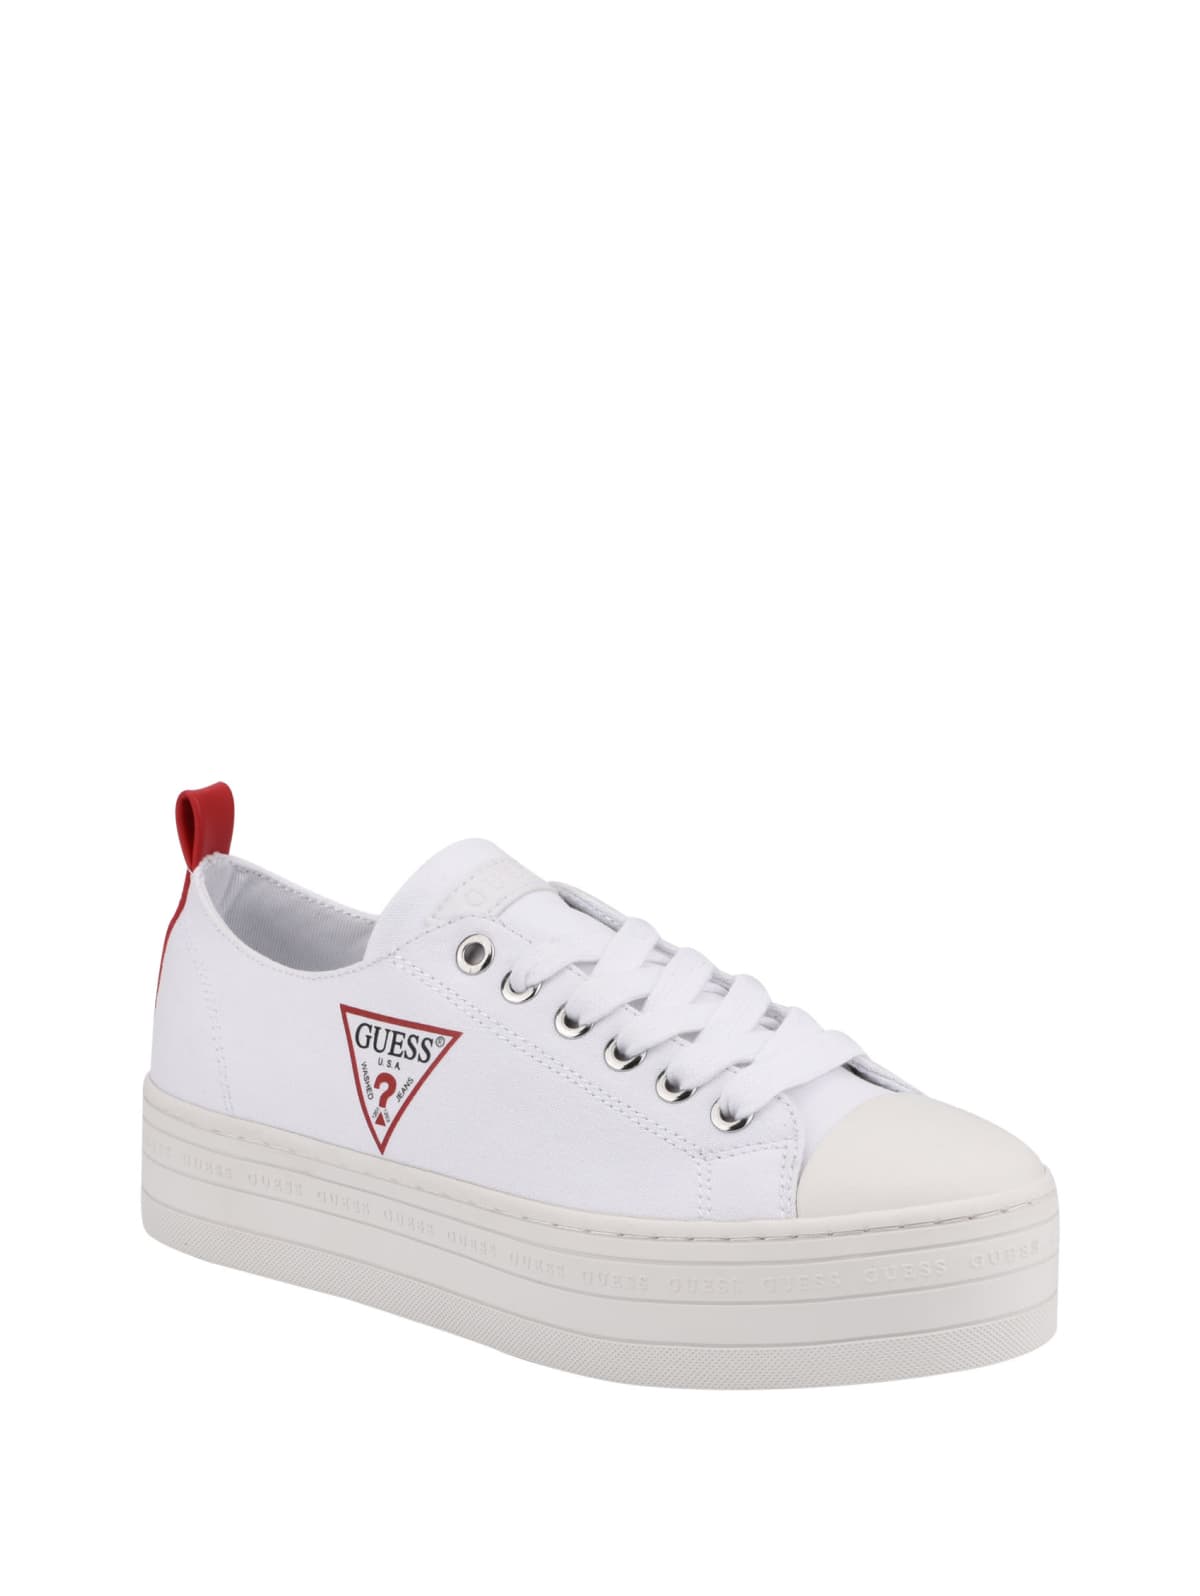 guess white platform sneakers